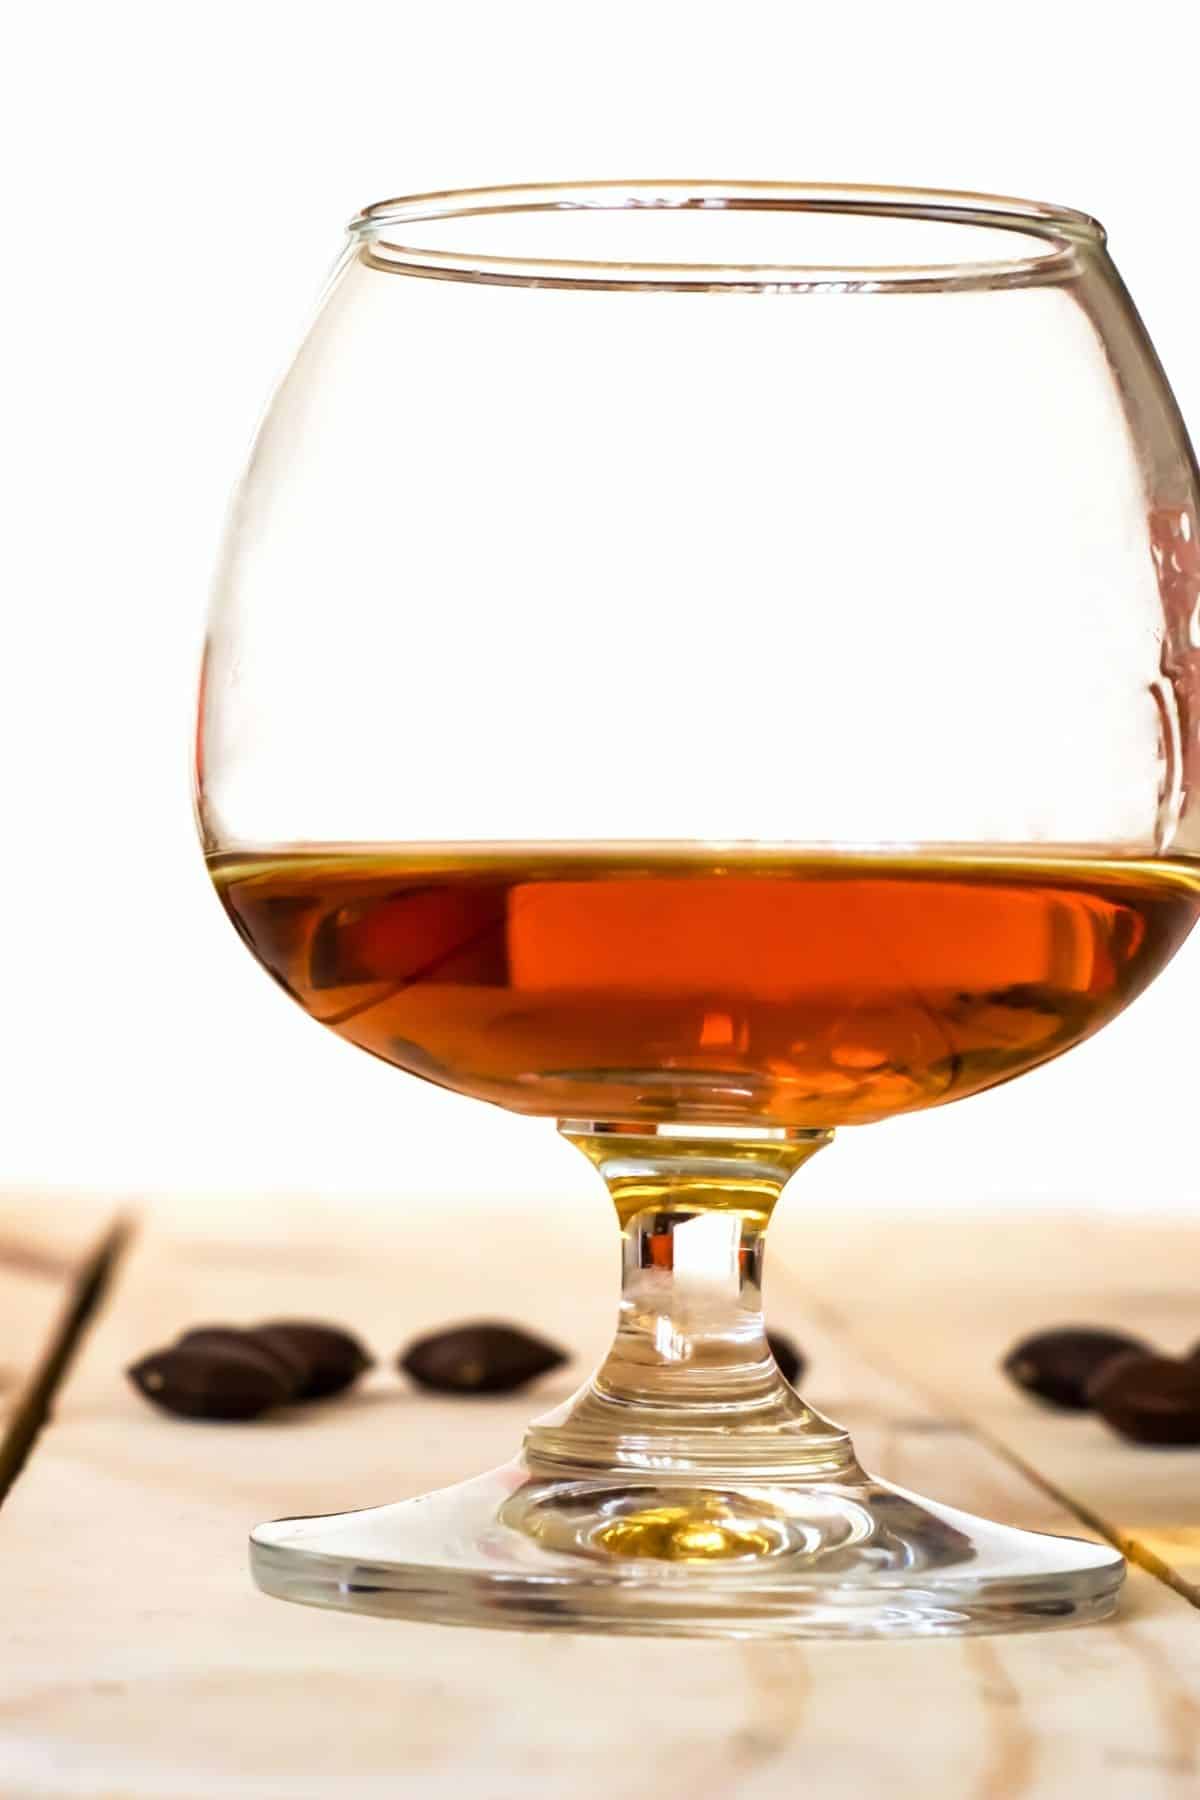 A glass snifter of brandy on a wooden table.